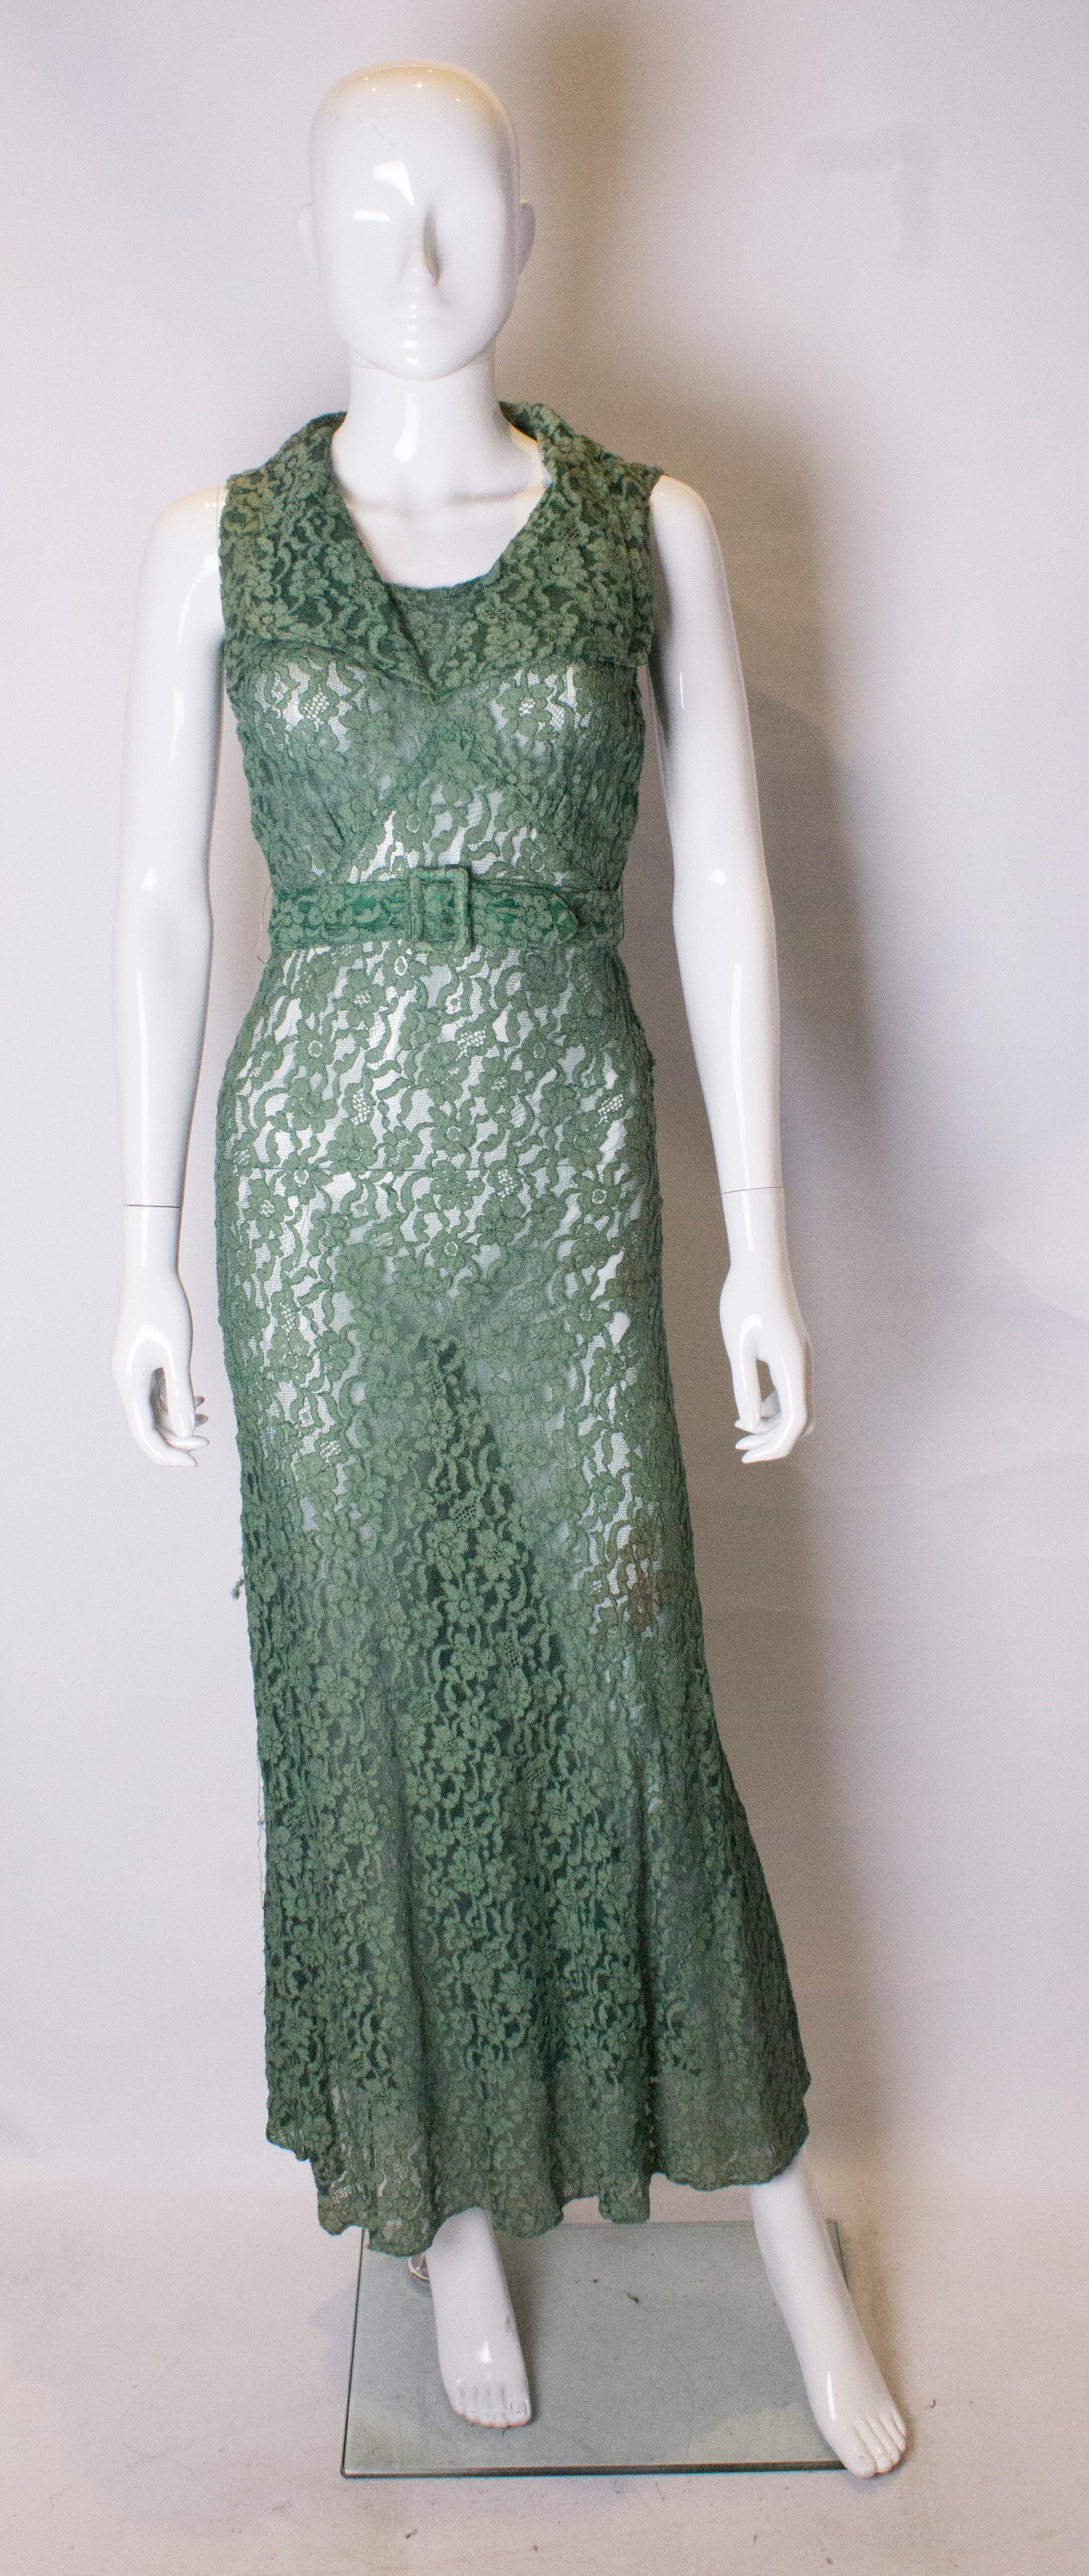 A stunning gown dating from the 1920s in green lace. The dress has a collar neckline, with side popper fastening, a matching belt and a flared skirt.
Measurements ; Bust 32'',waist 22 '', length 59''